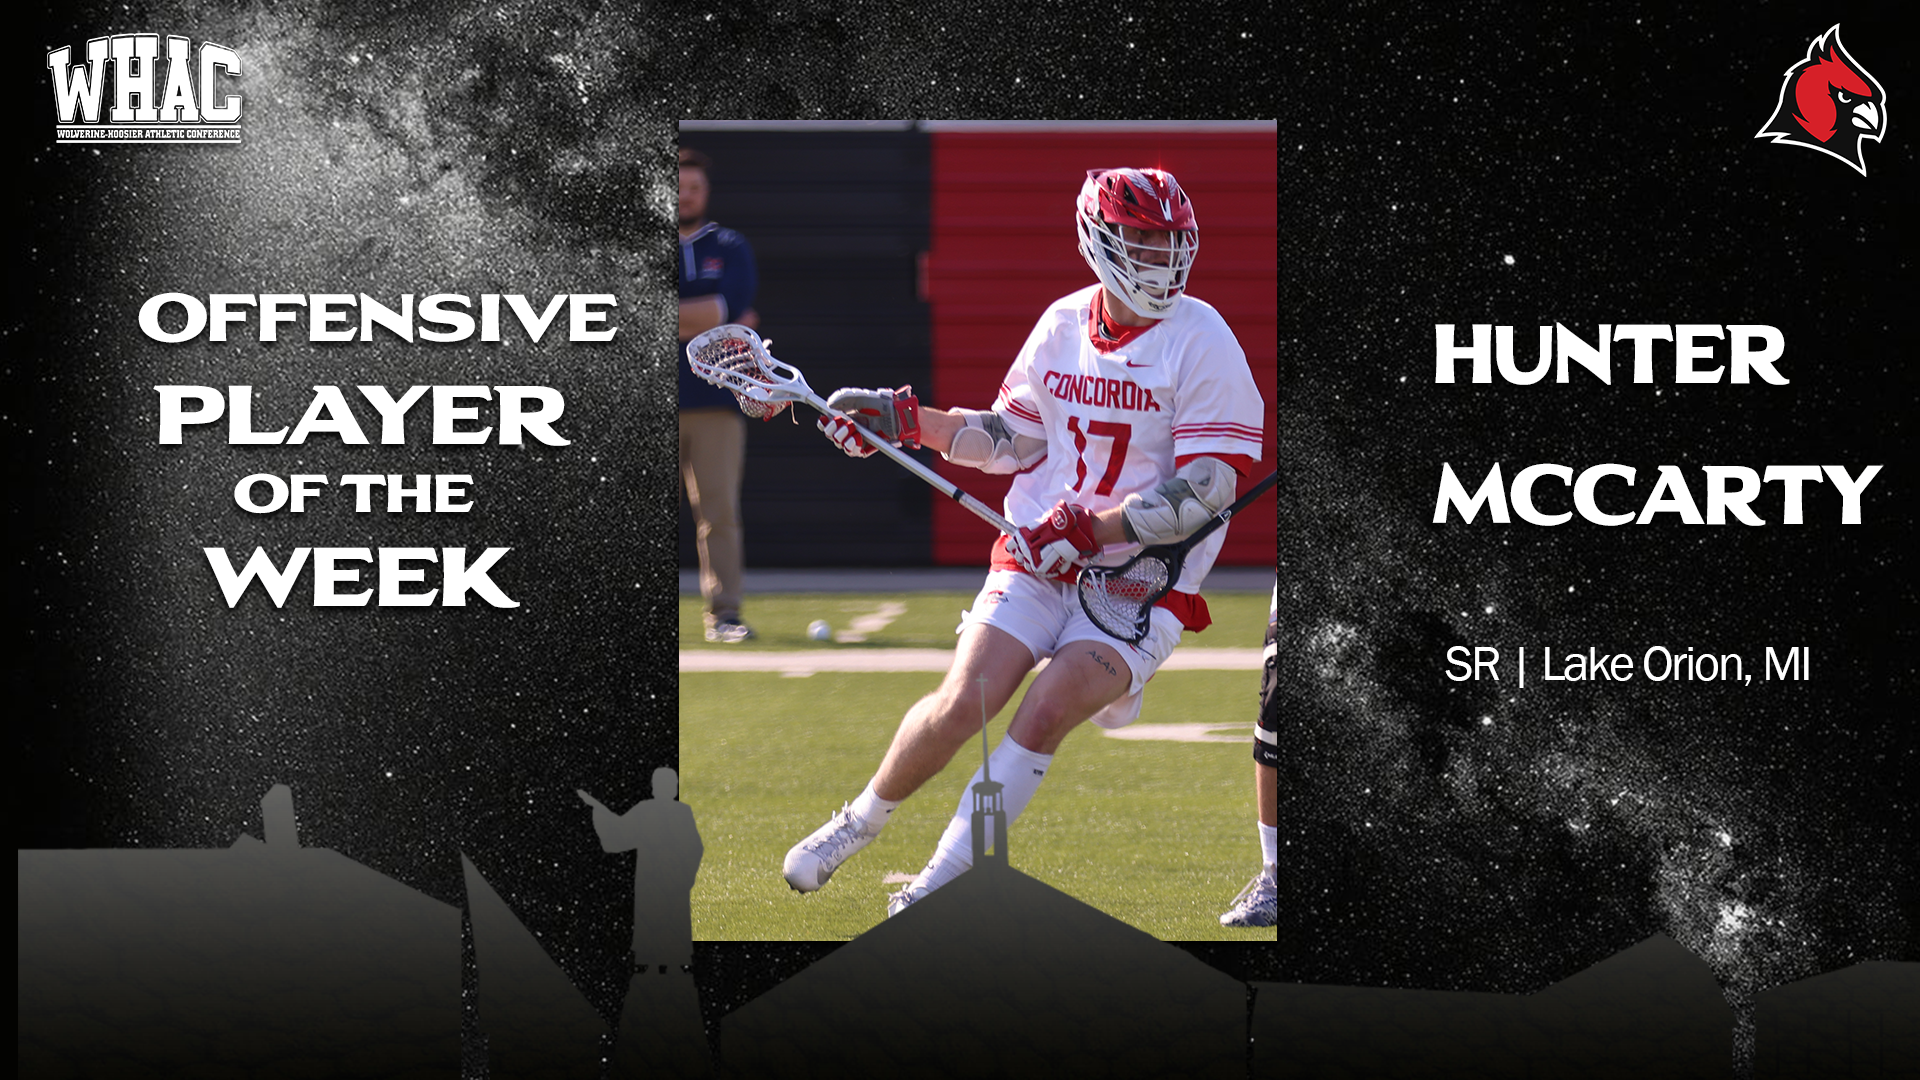 McCarty wins fourth career WHAC Offensive Player of the Week